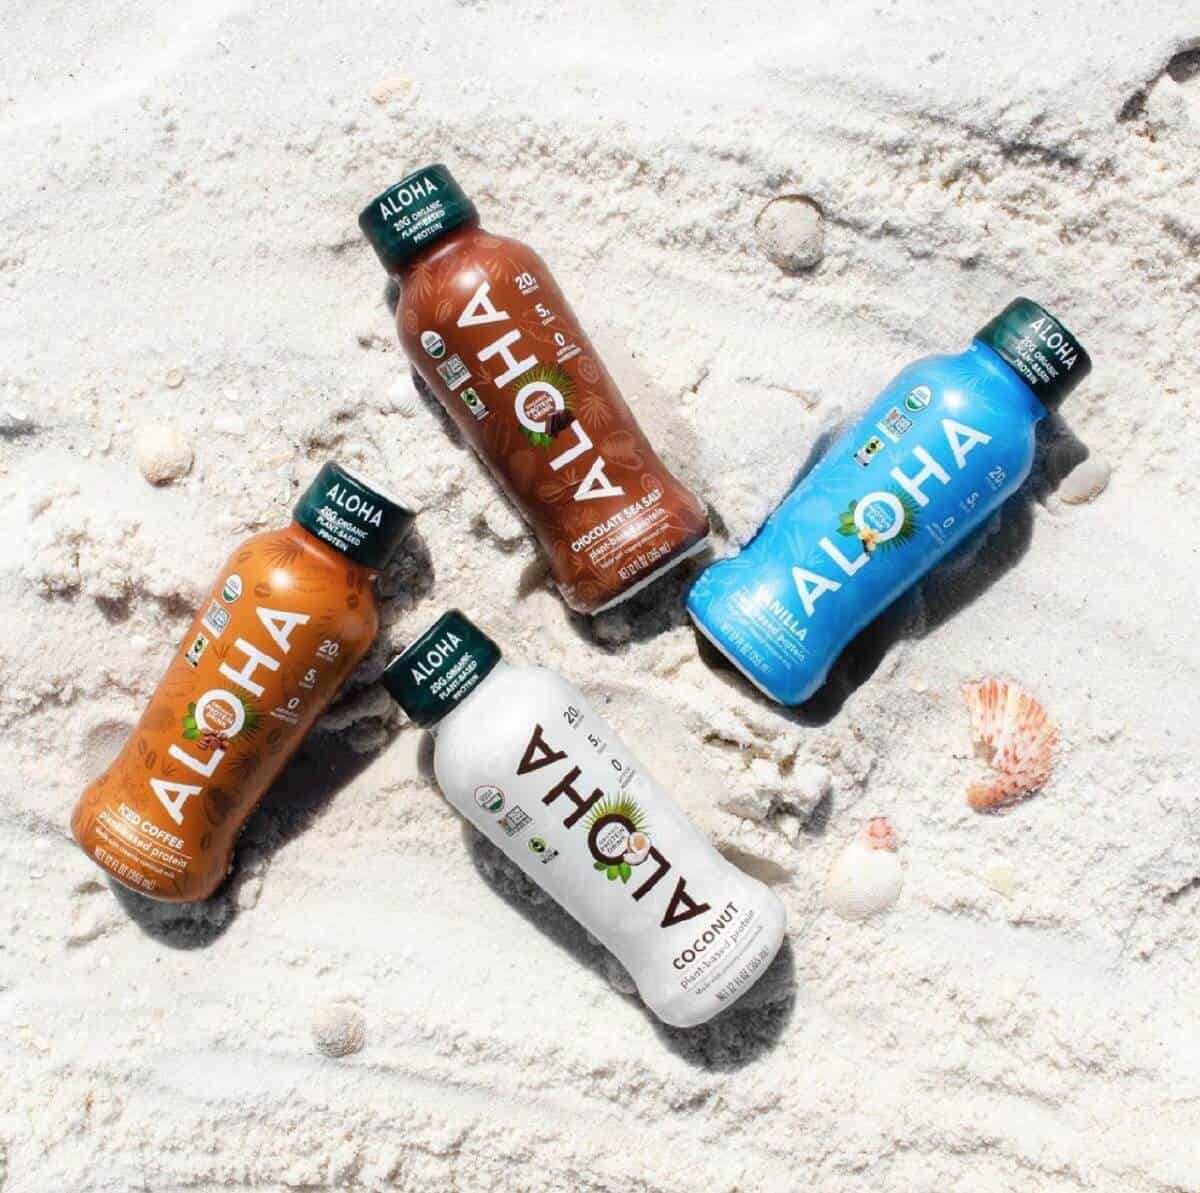 Four bottles of Aloha Protein Shakes in blue, white, orange, and brown colors laying in the sand on the beach.